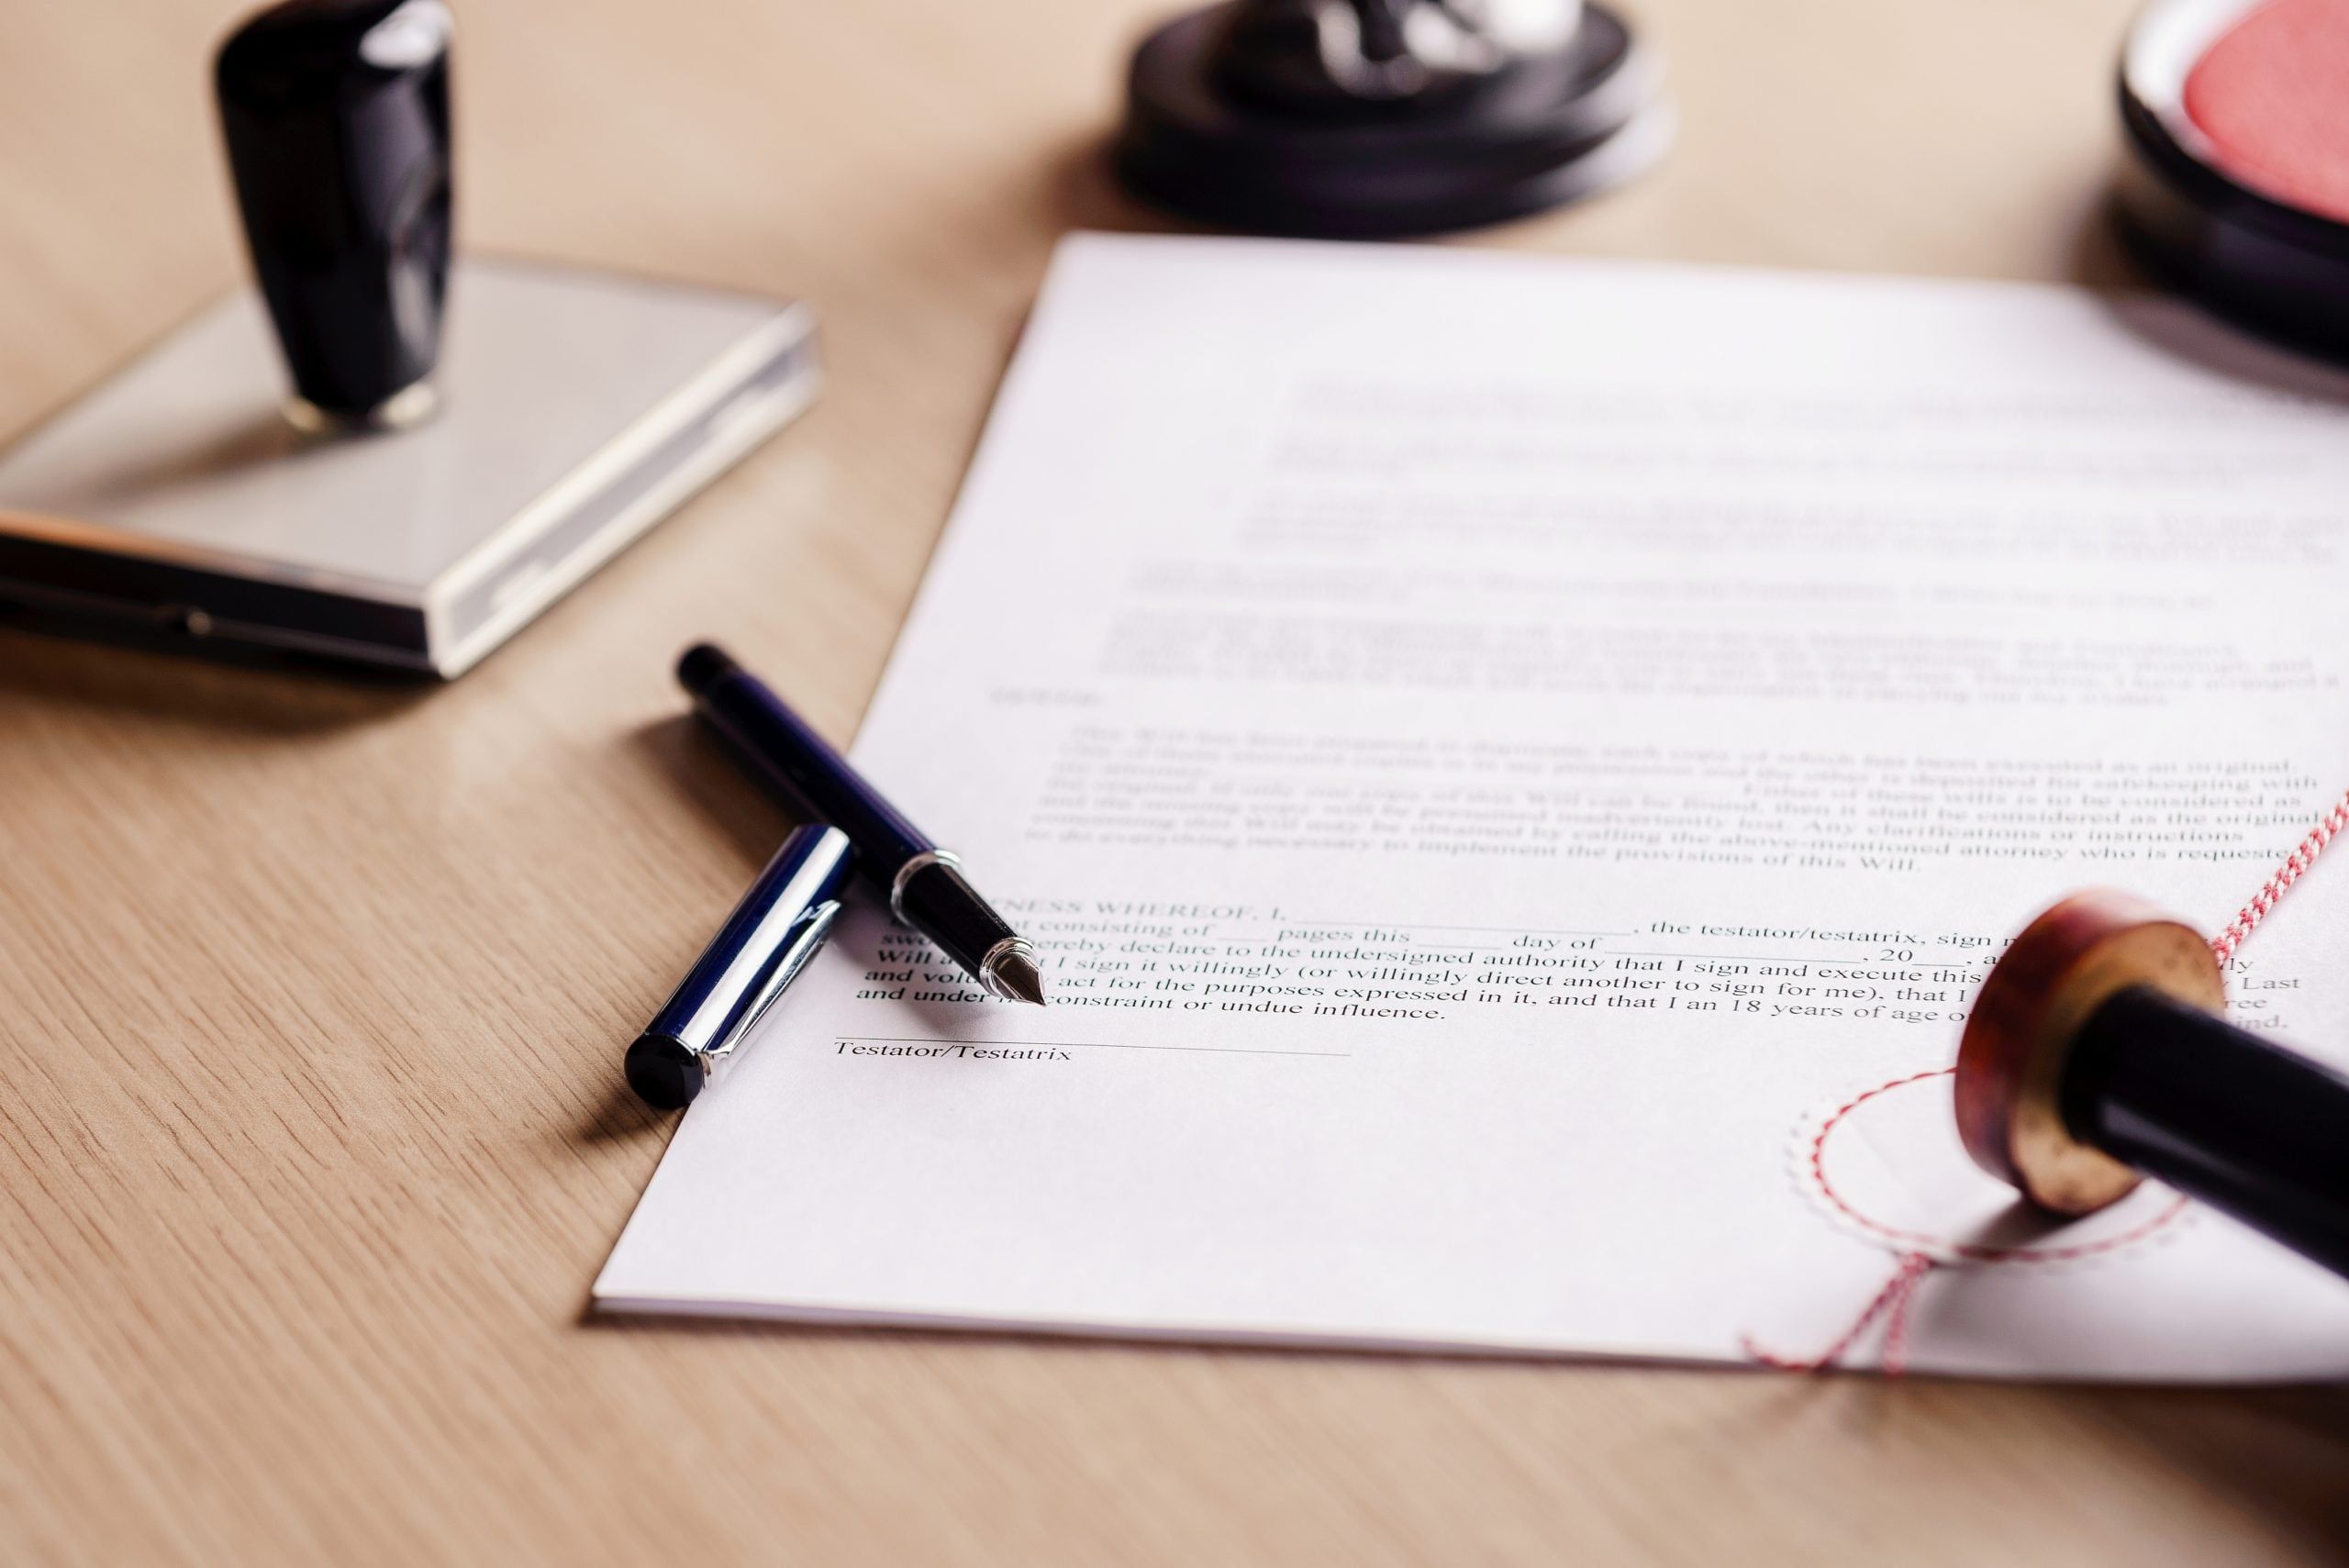 Power of attorney vs. guardianship: What’s the difference?